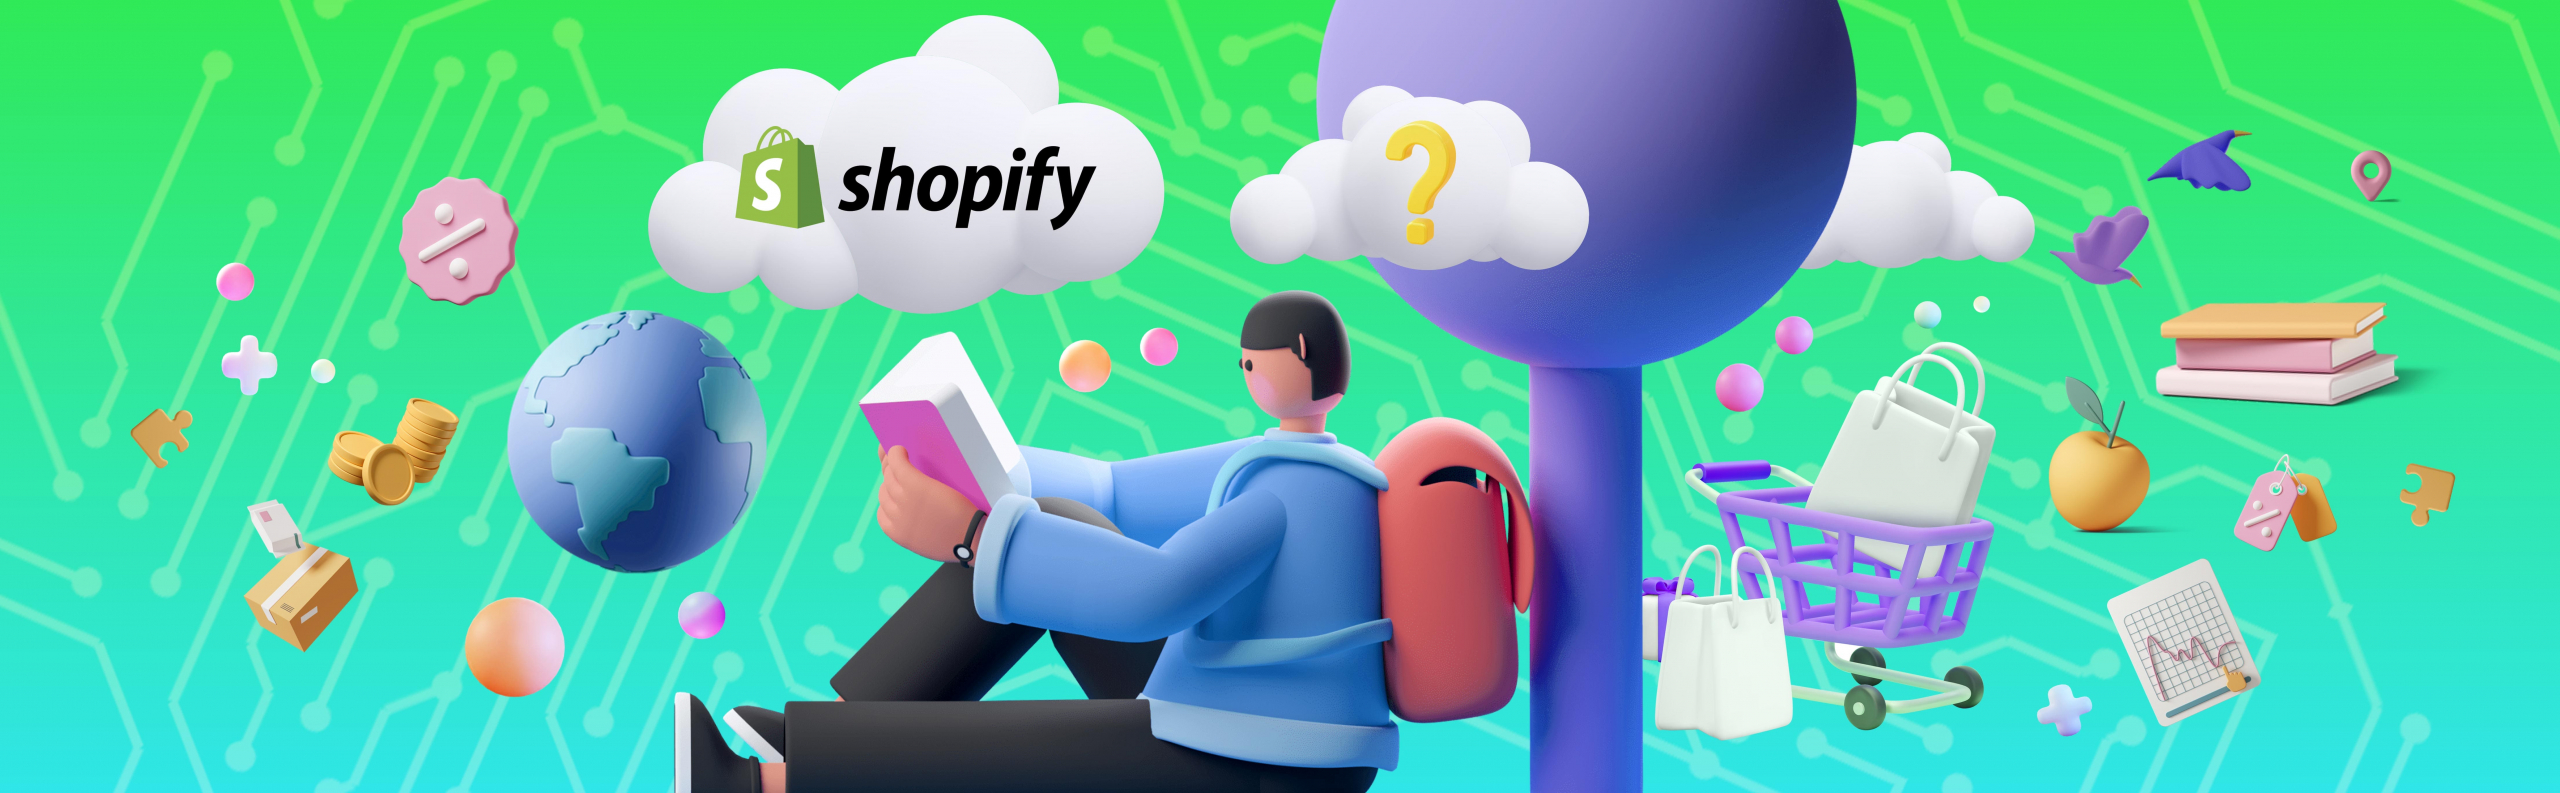 Does Shopify Do Accounting?